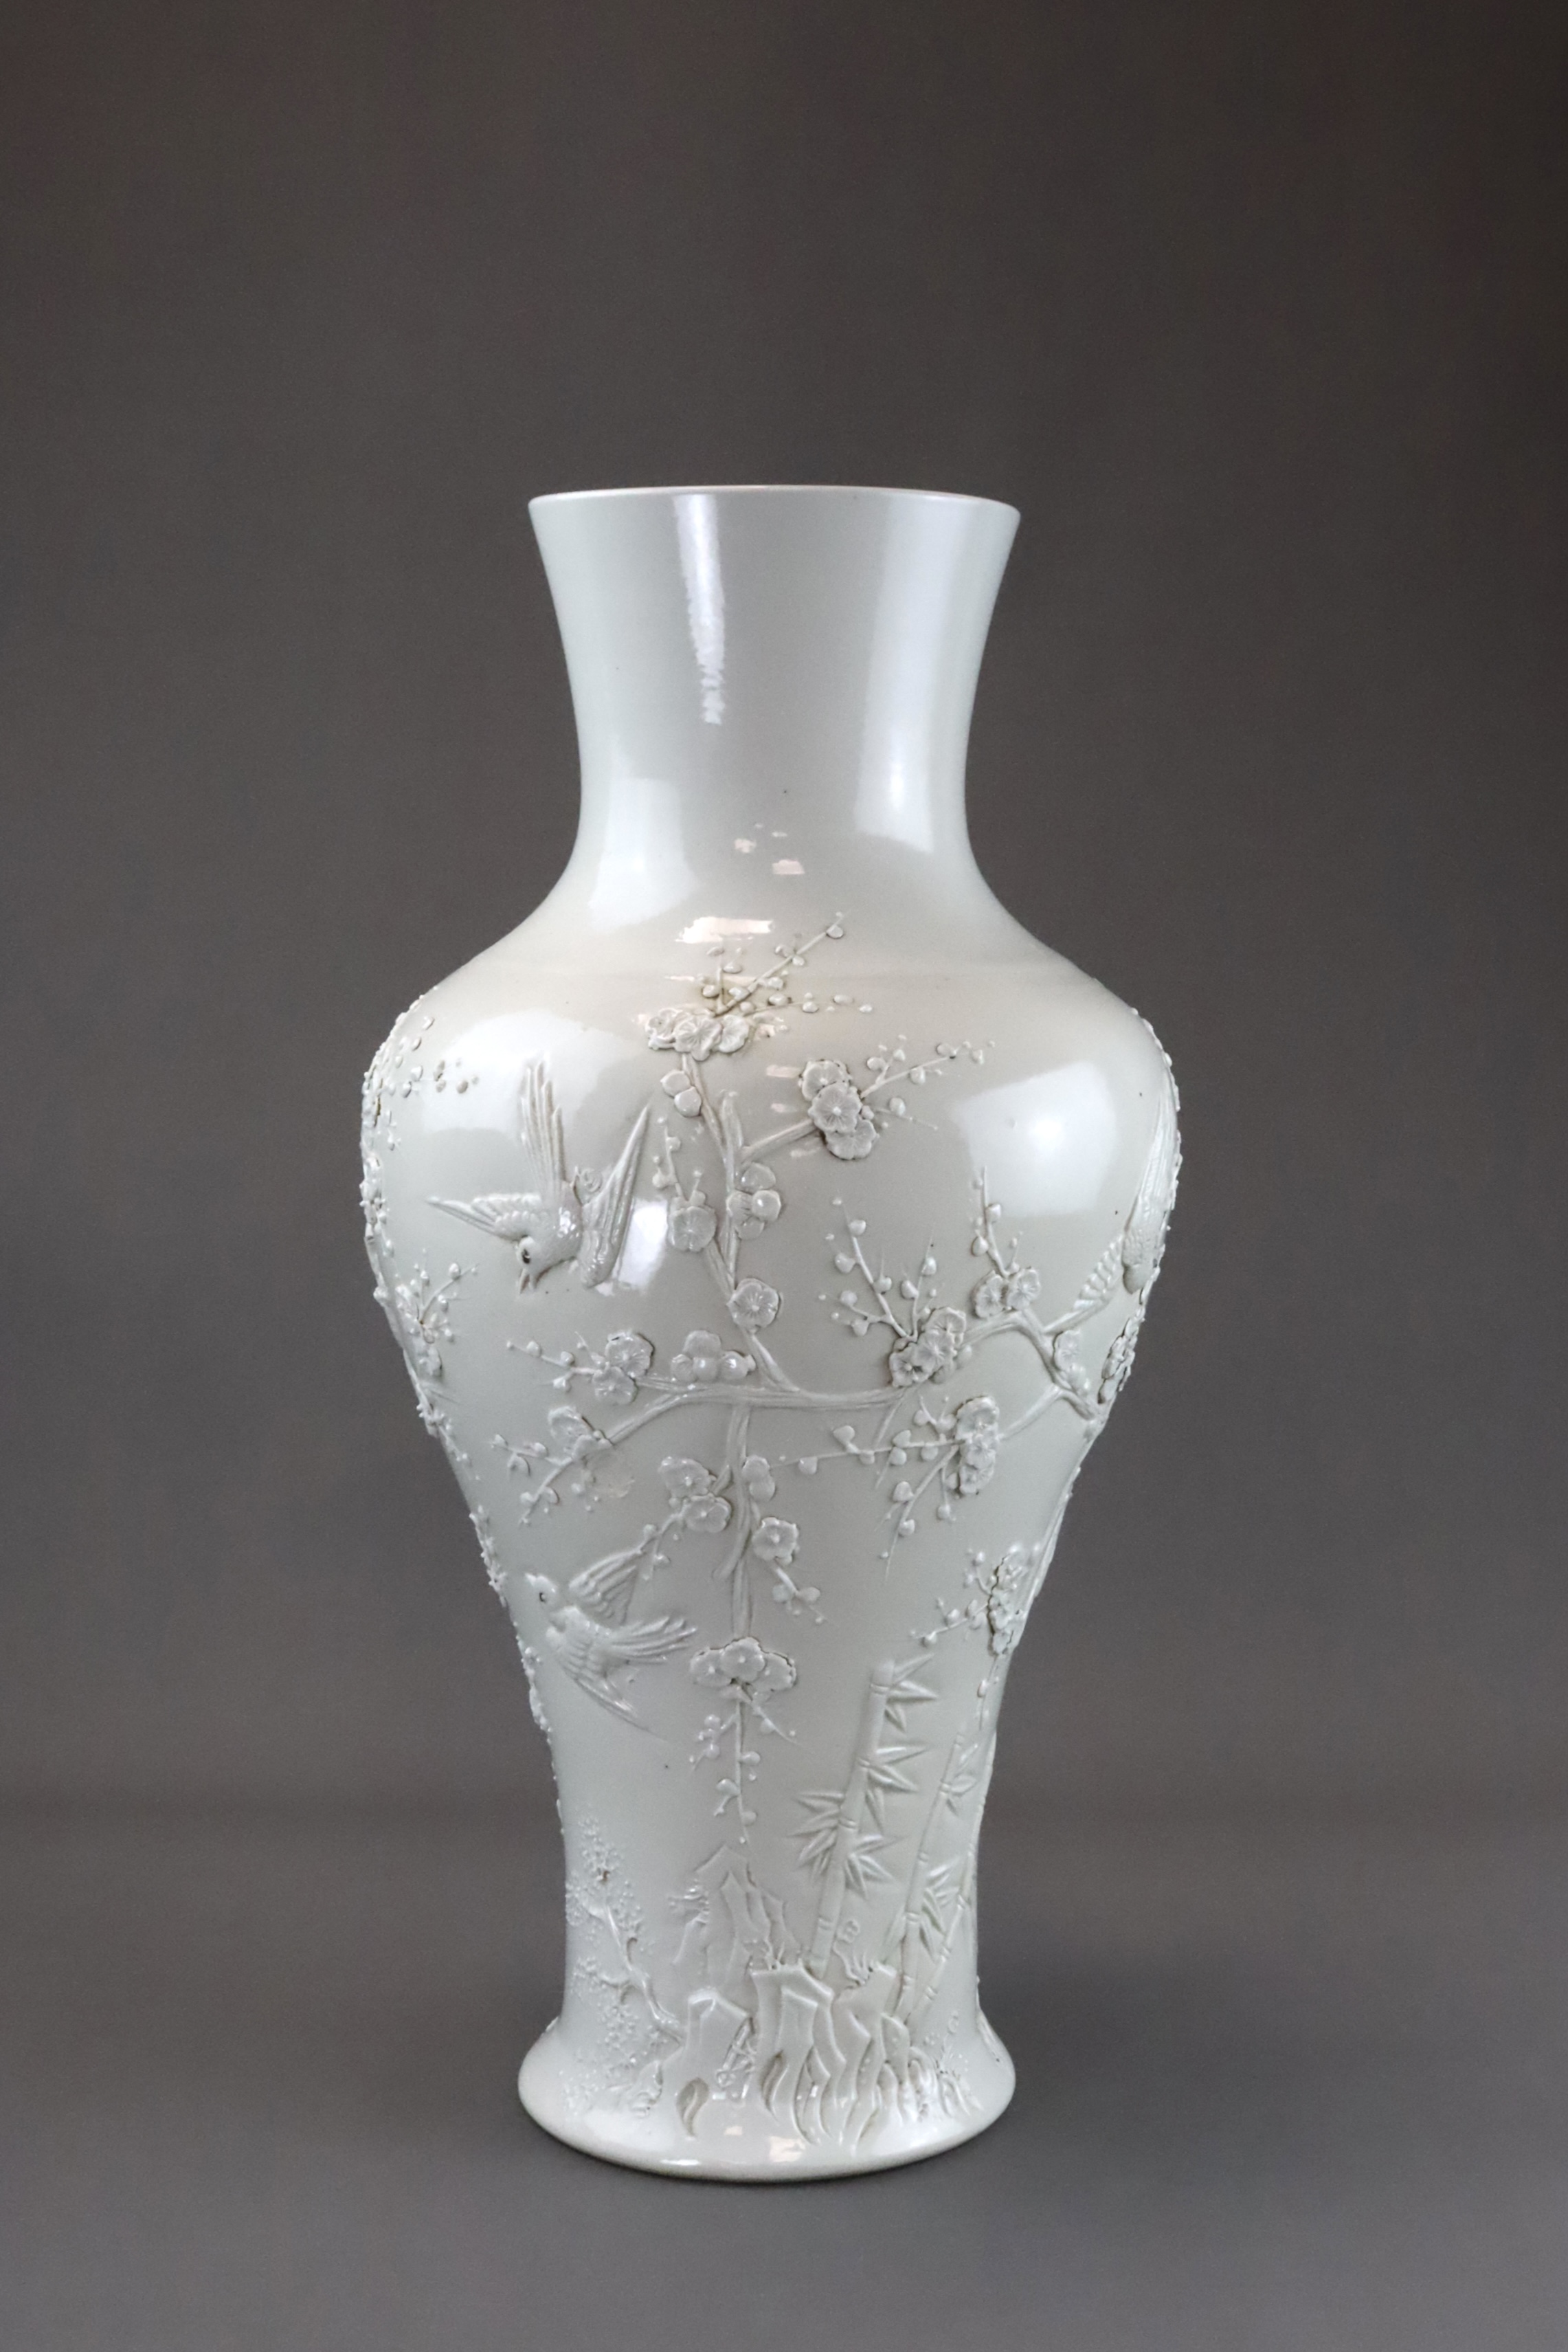 A Large White glazed Wang Bingrong type Bird and Flower Vase, late Qing dynasty, - Image 3 of 8